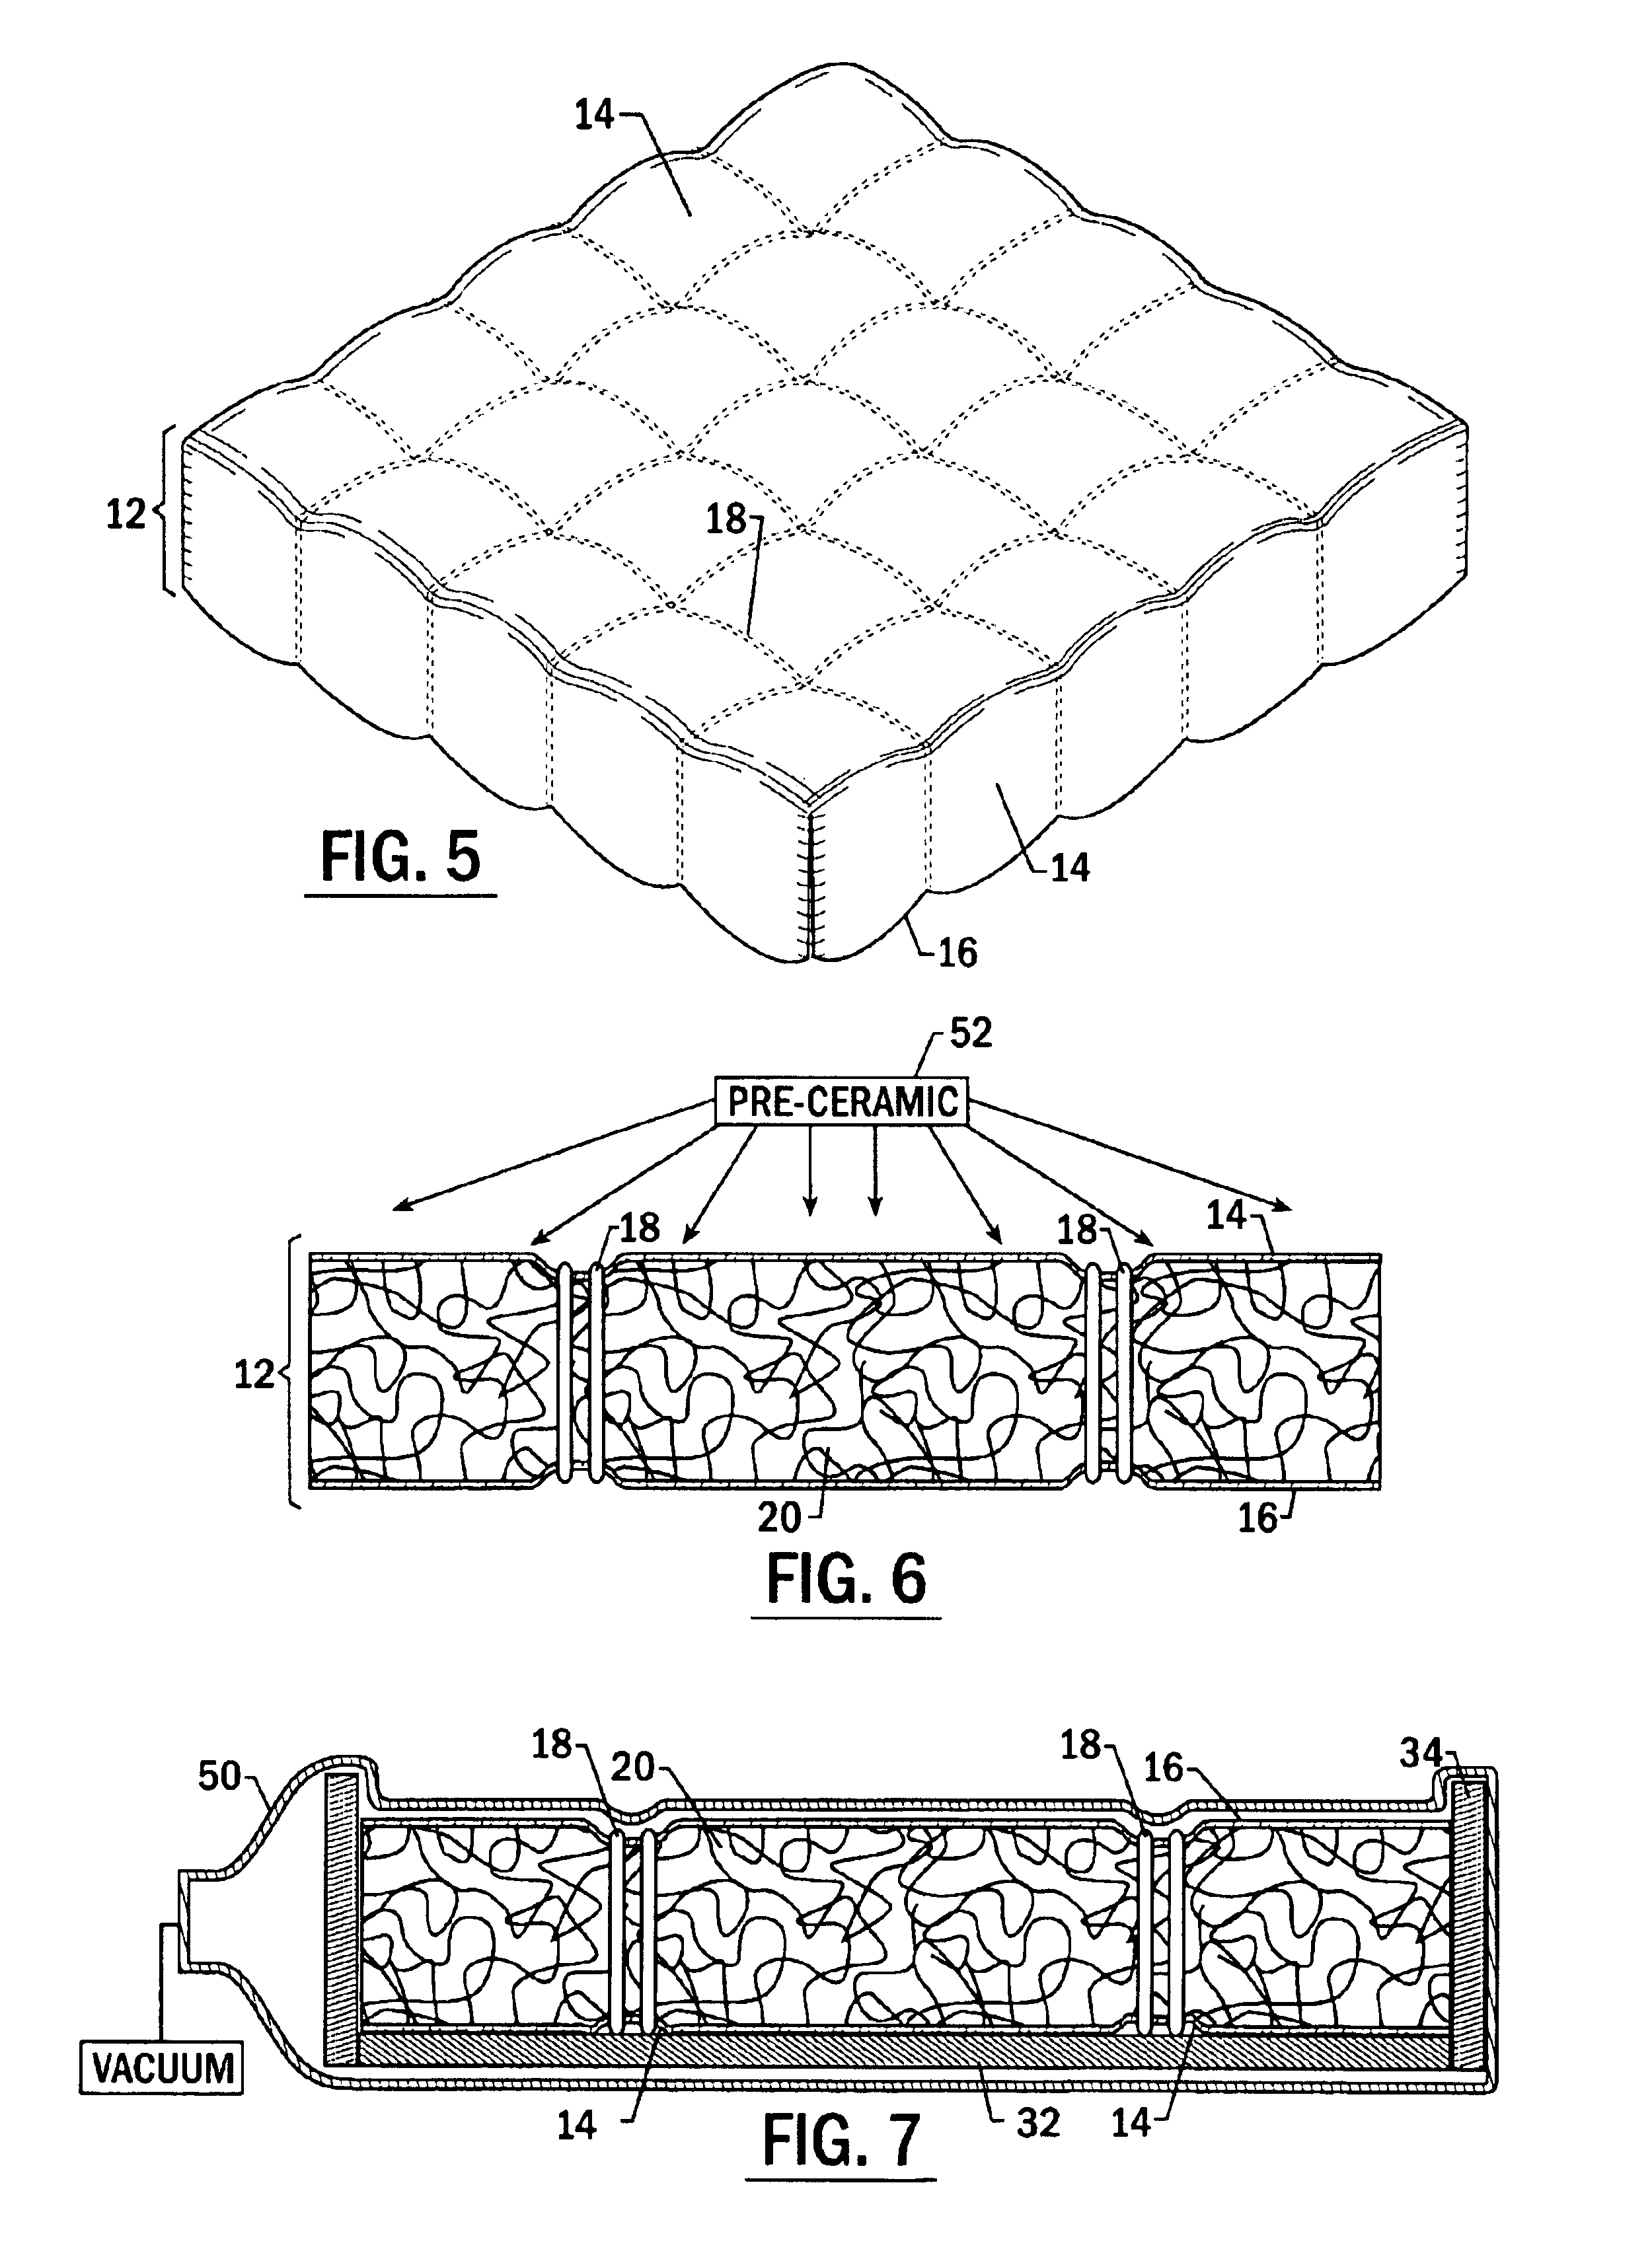 Method of forming a flexible insulation blanket having a ceramic matrix composite outer layer